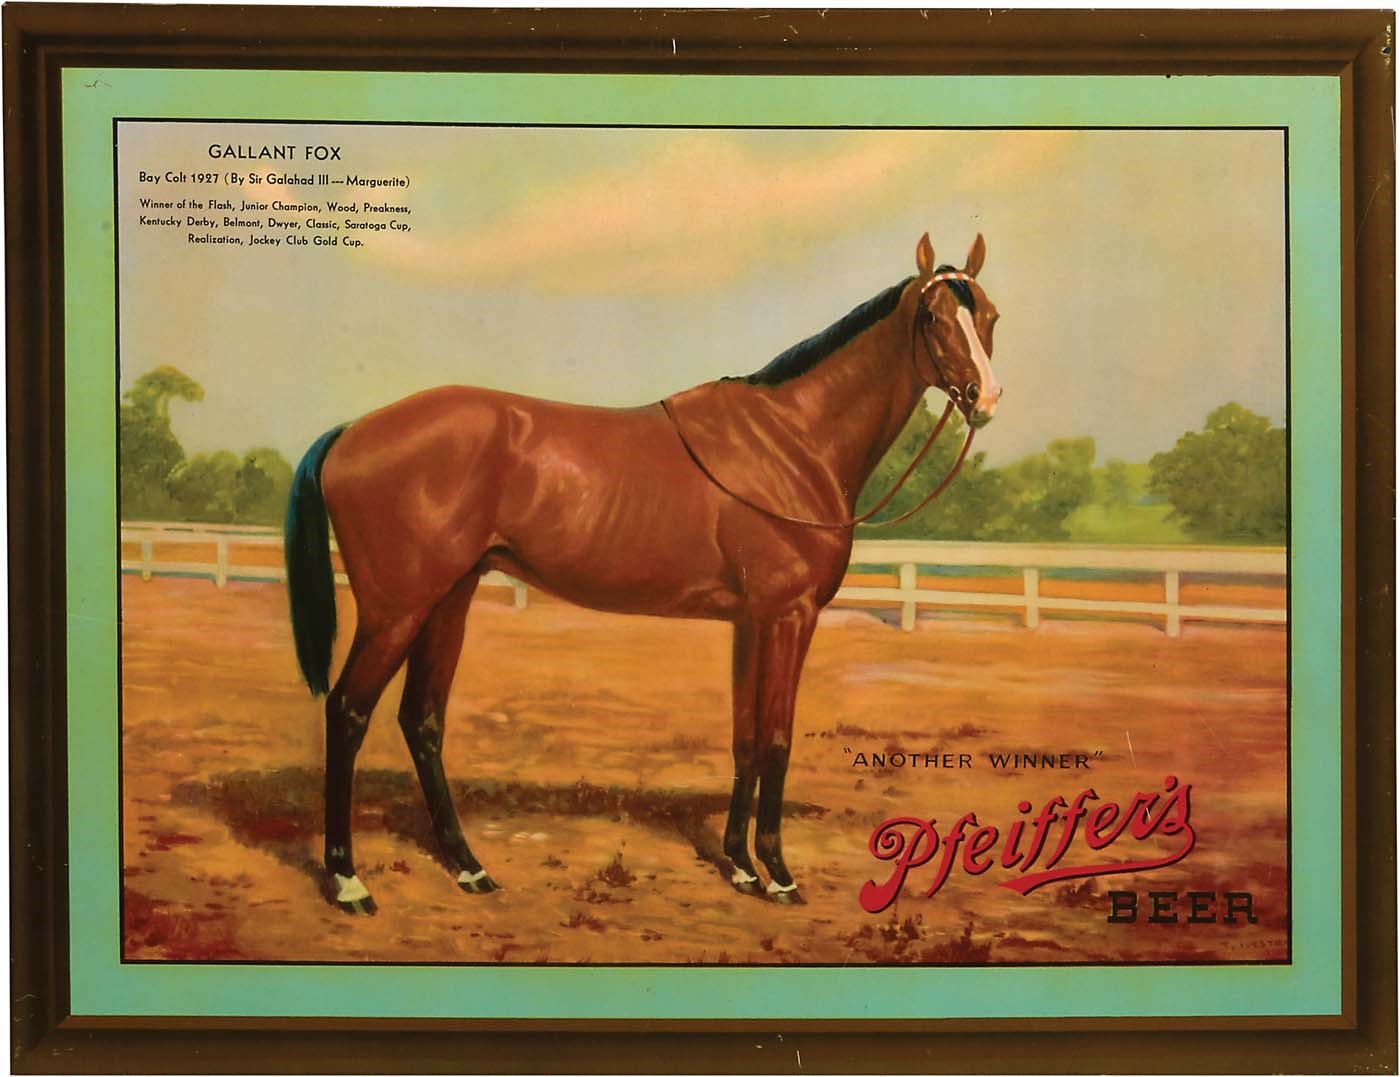 Horse Racing - Finest Known 1939 Gallant Fox Pfeiffer Beer Litho Tin Sign